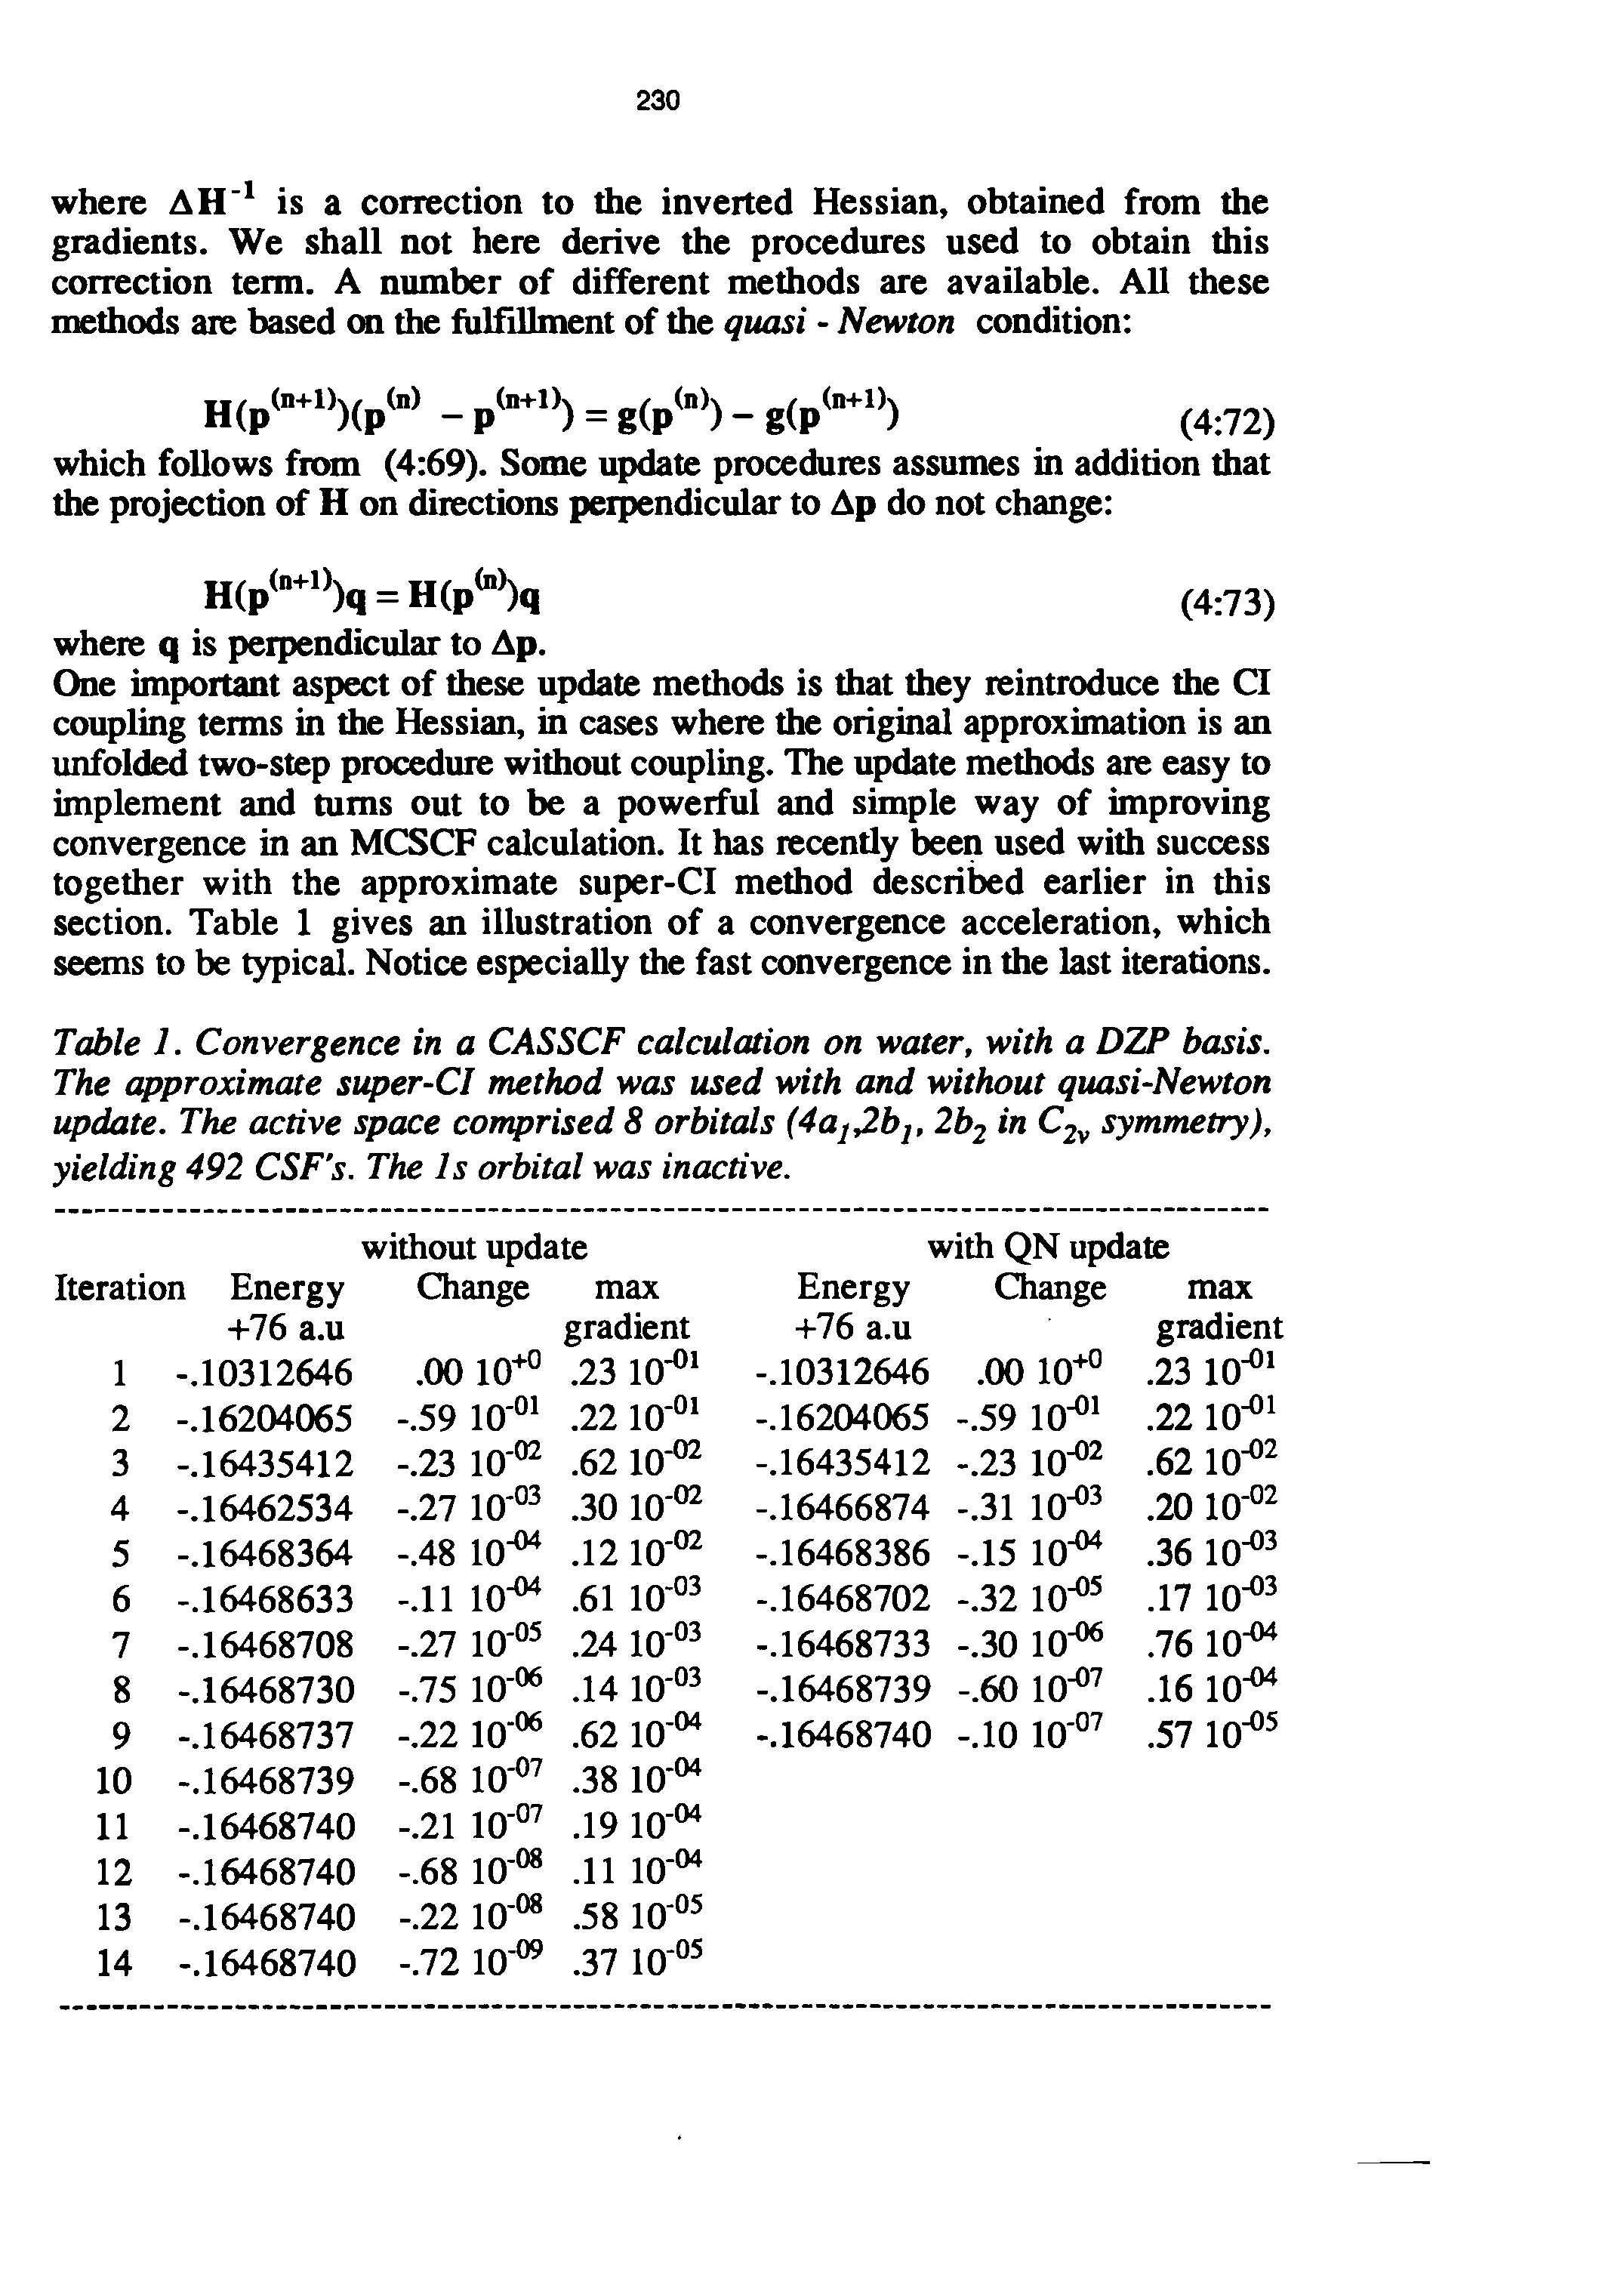 Table 1. Convergence in a CASSCF calculation on water, with a DTP basis. The approximate super-CI method was used with and without quasi-Newton update. The active space comprised 8 orbitals (4a12b1, 2b2 in C2v symmetry), yielding 492 CSF s. The Is orbital was inactive.